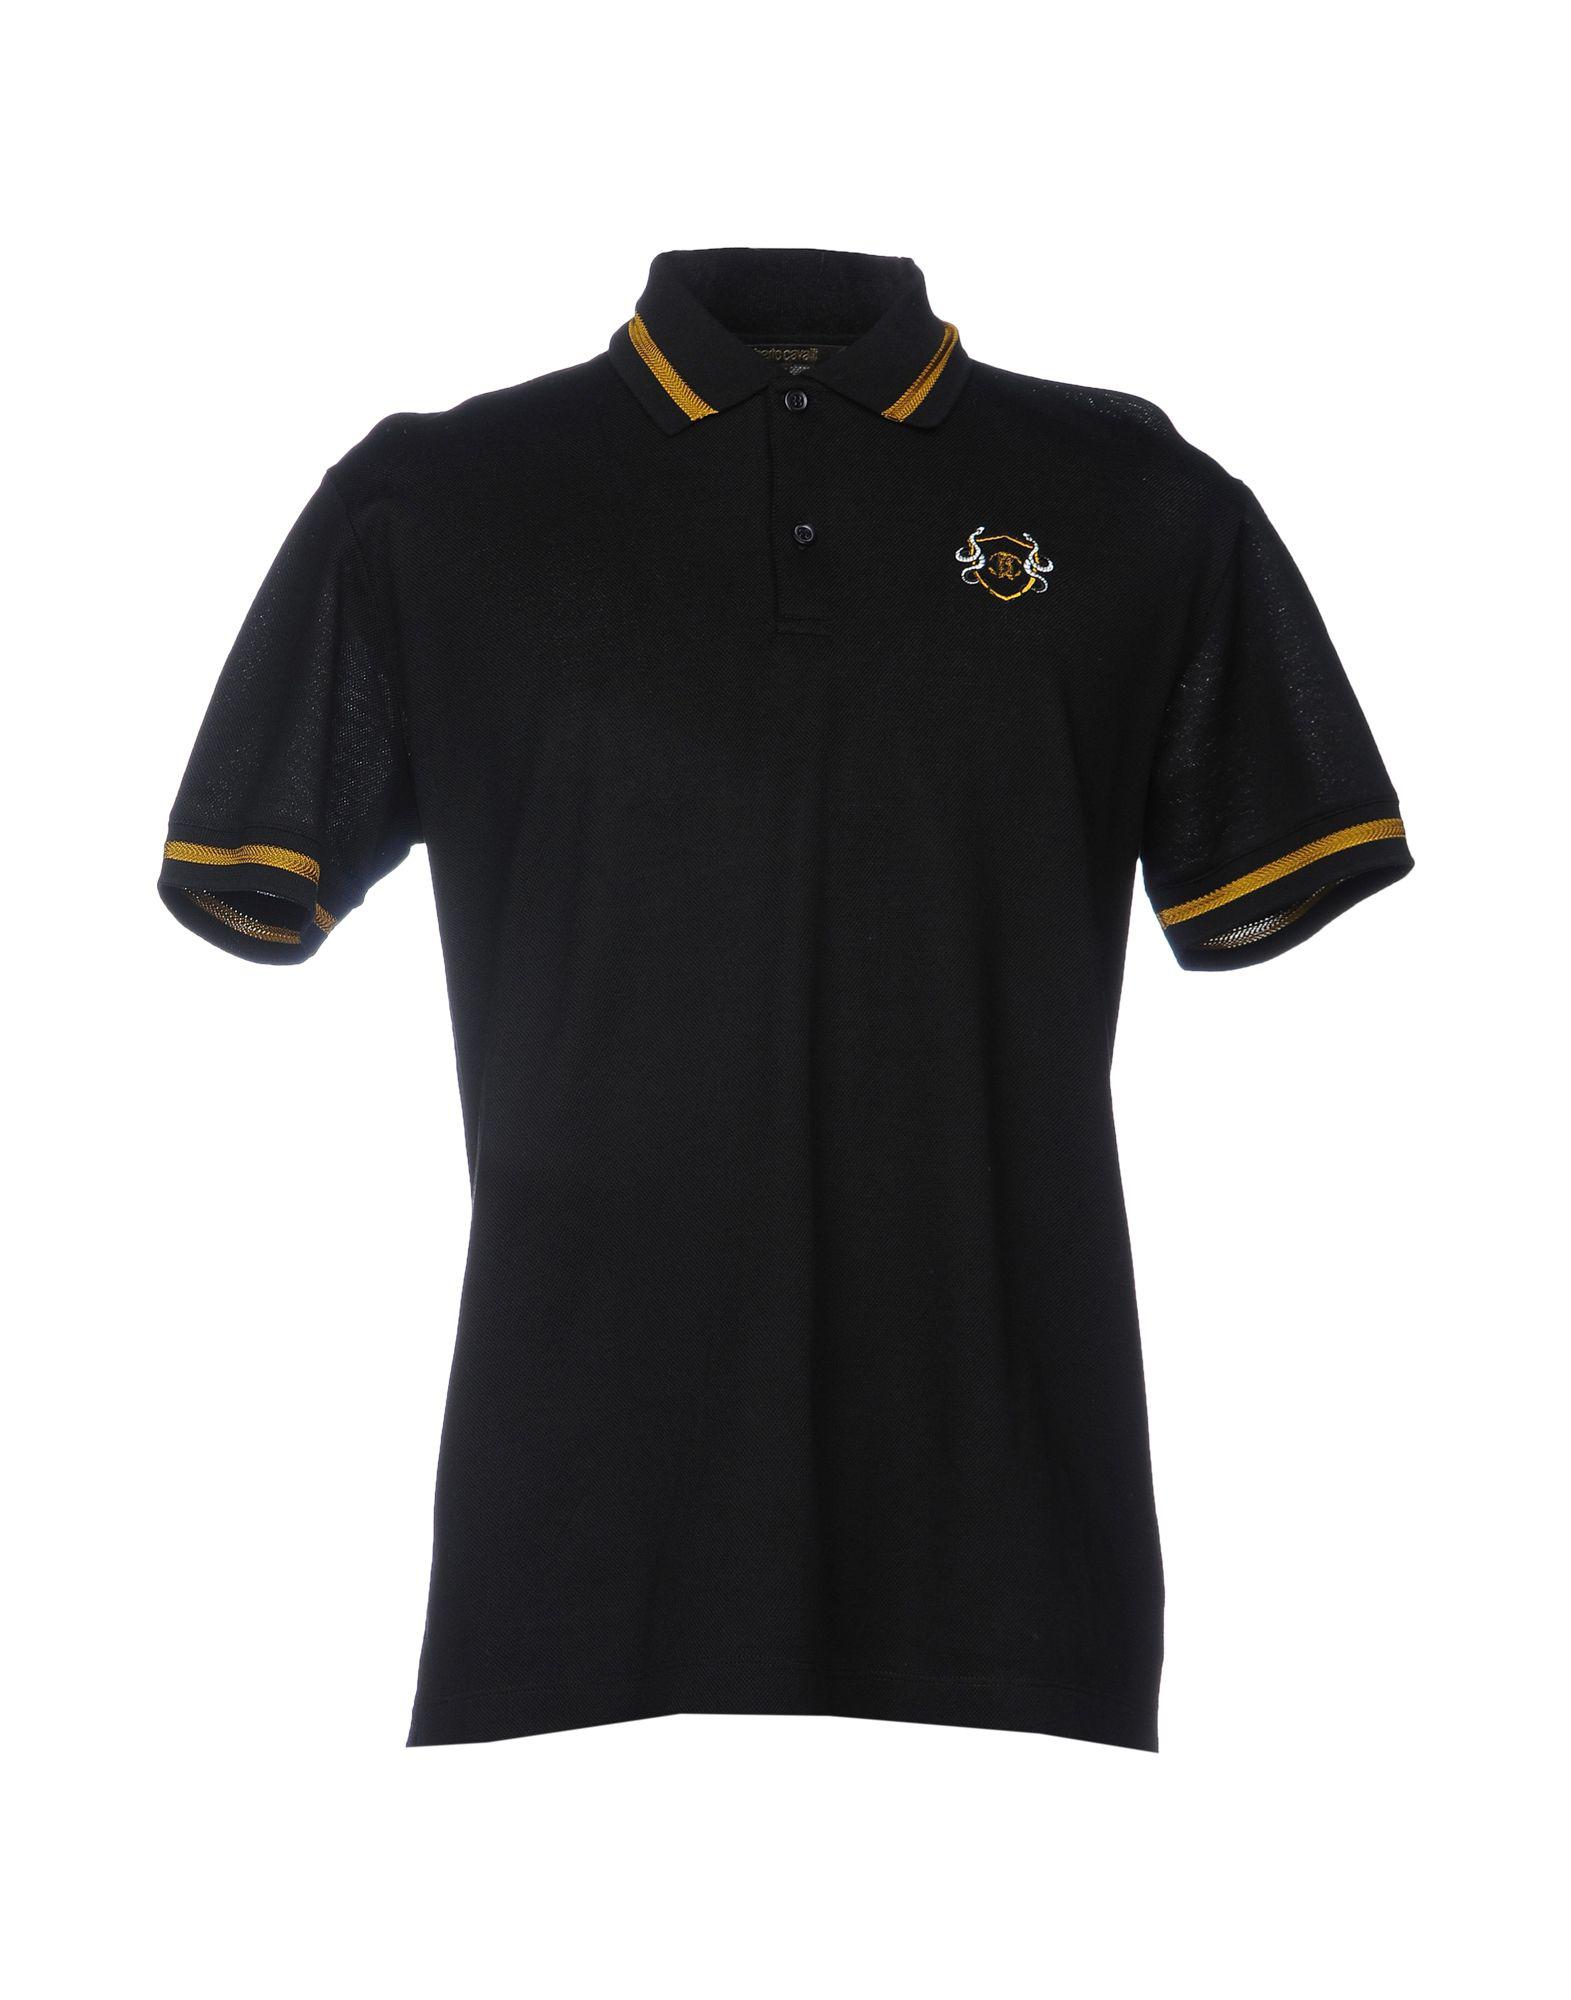 Roberto Cavalli Cotton Embroidered Logo Polo Shirt in Black for Men - Lyst